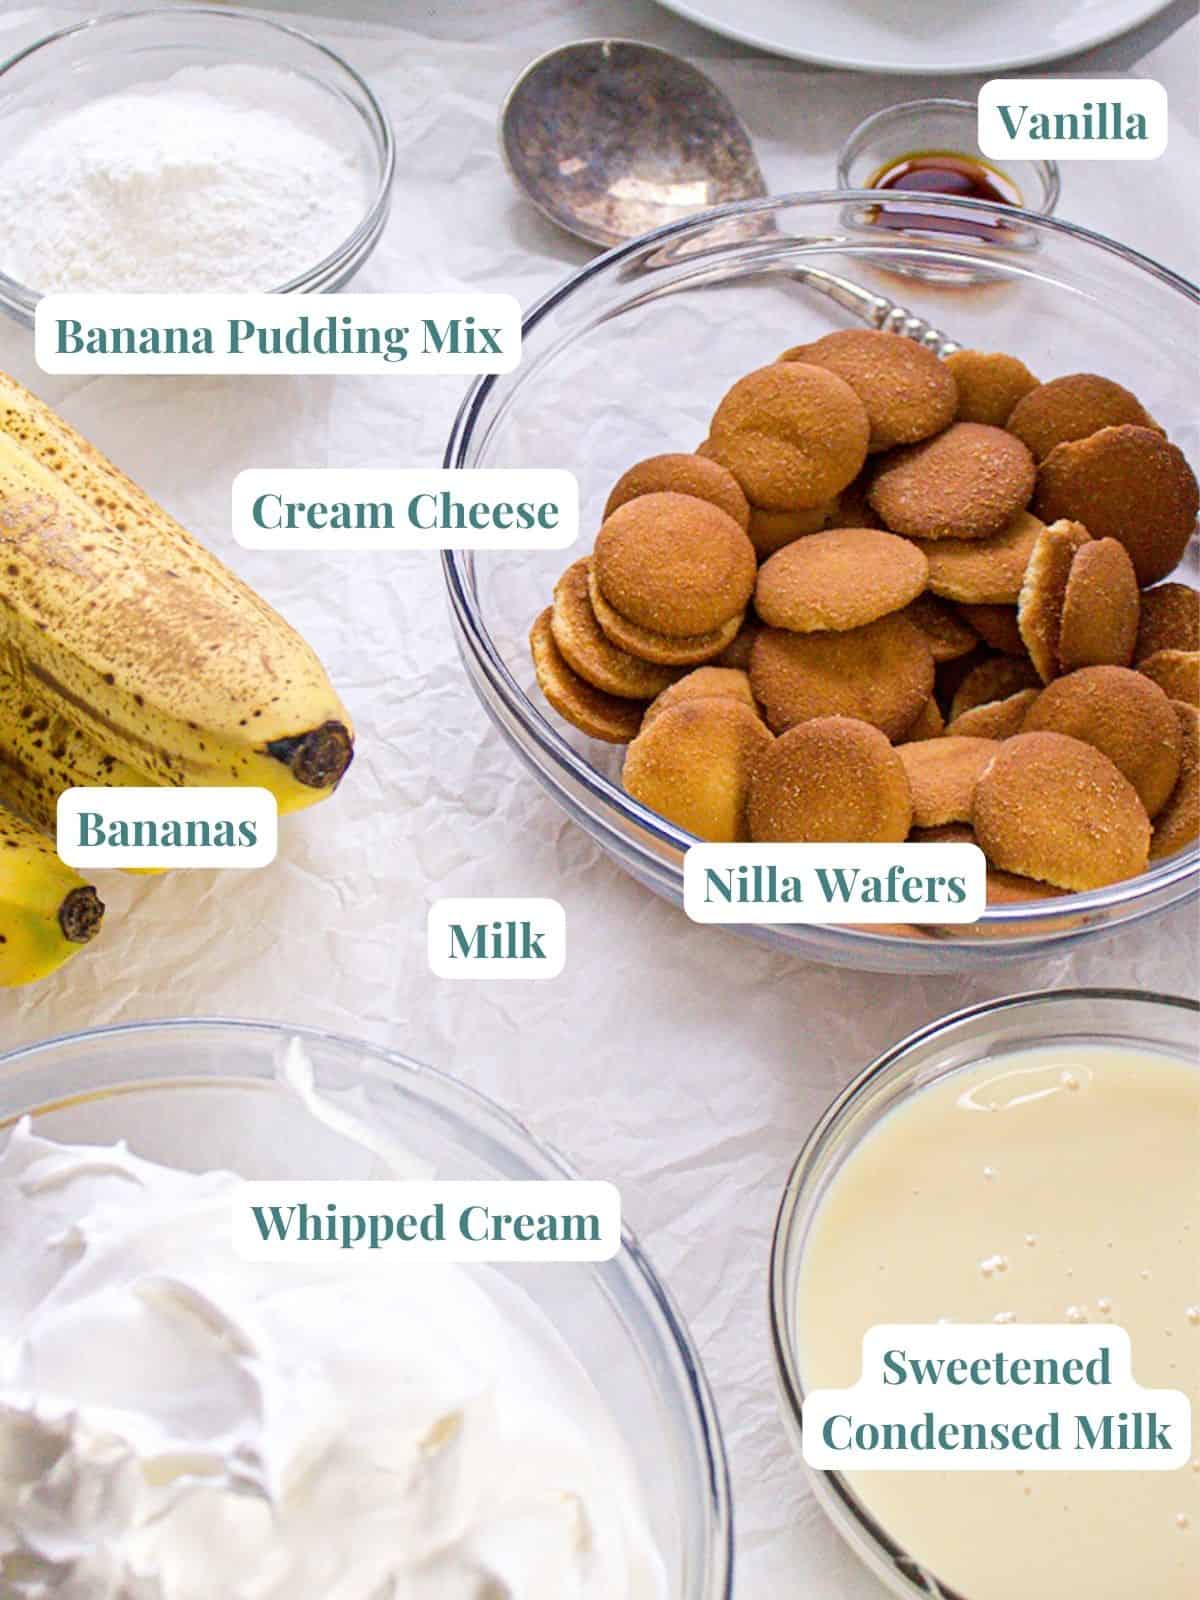 banana pudding ingredients laid out